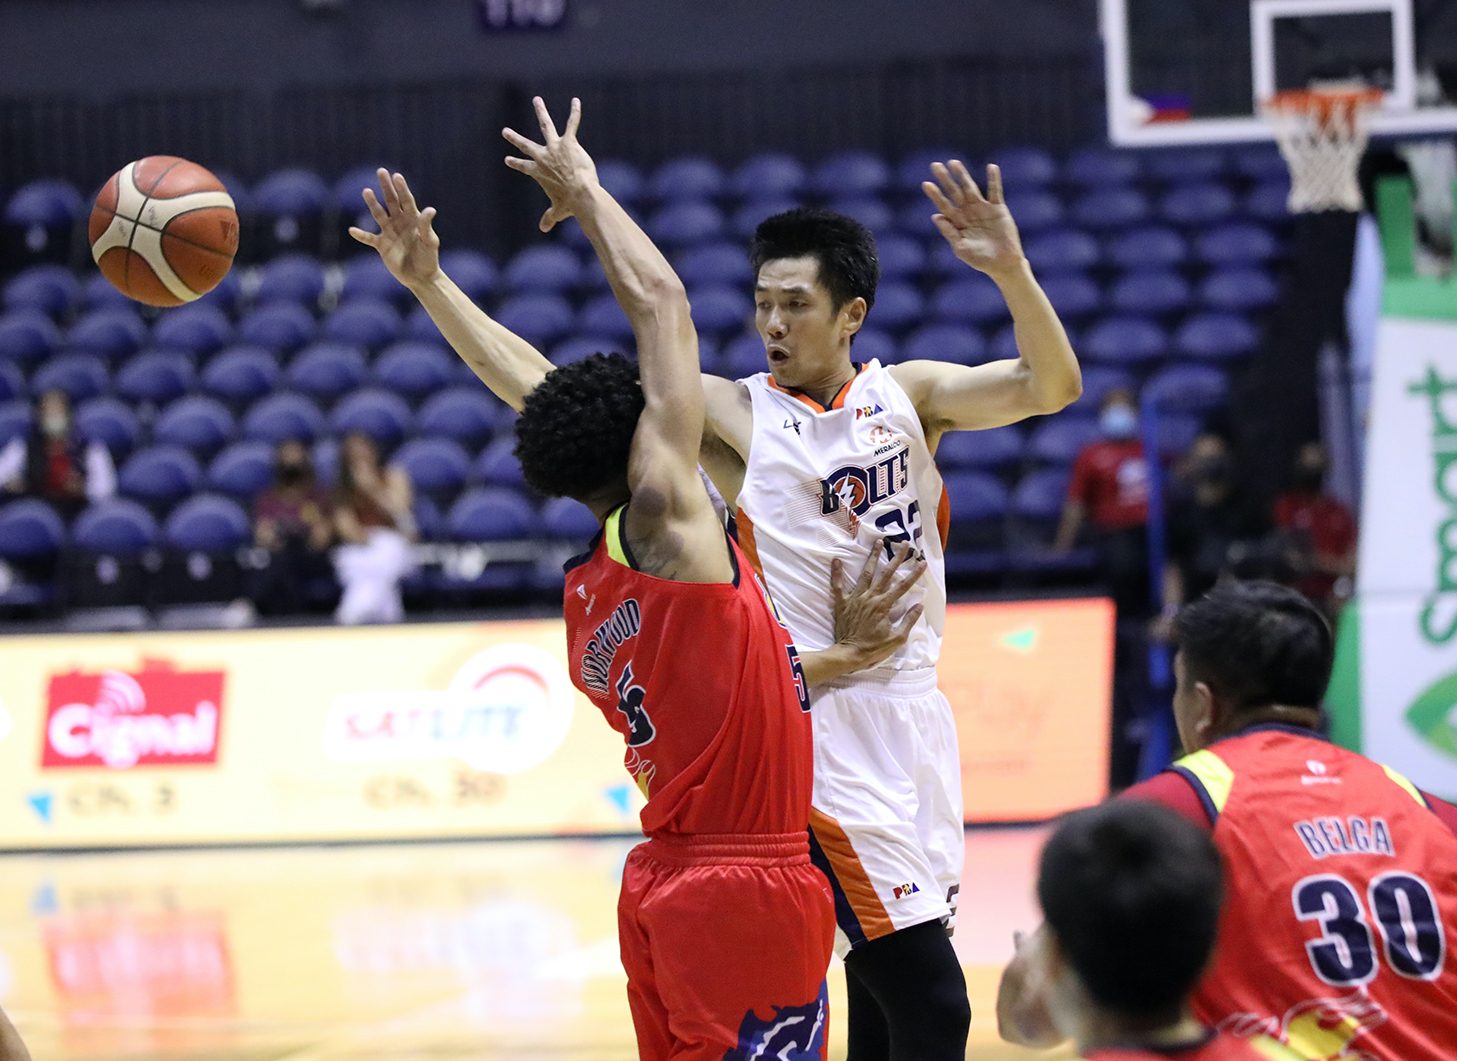 Black proves clutch as Meralco adds to Rain or Shine woes